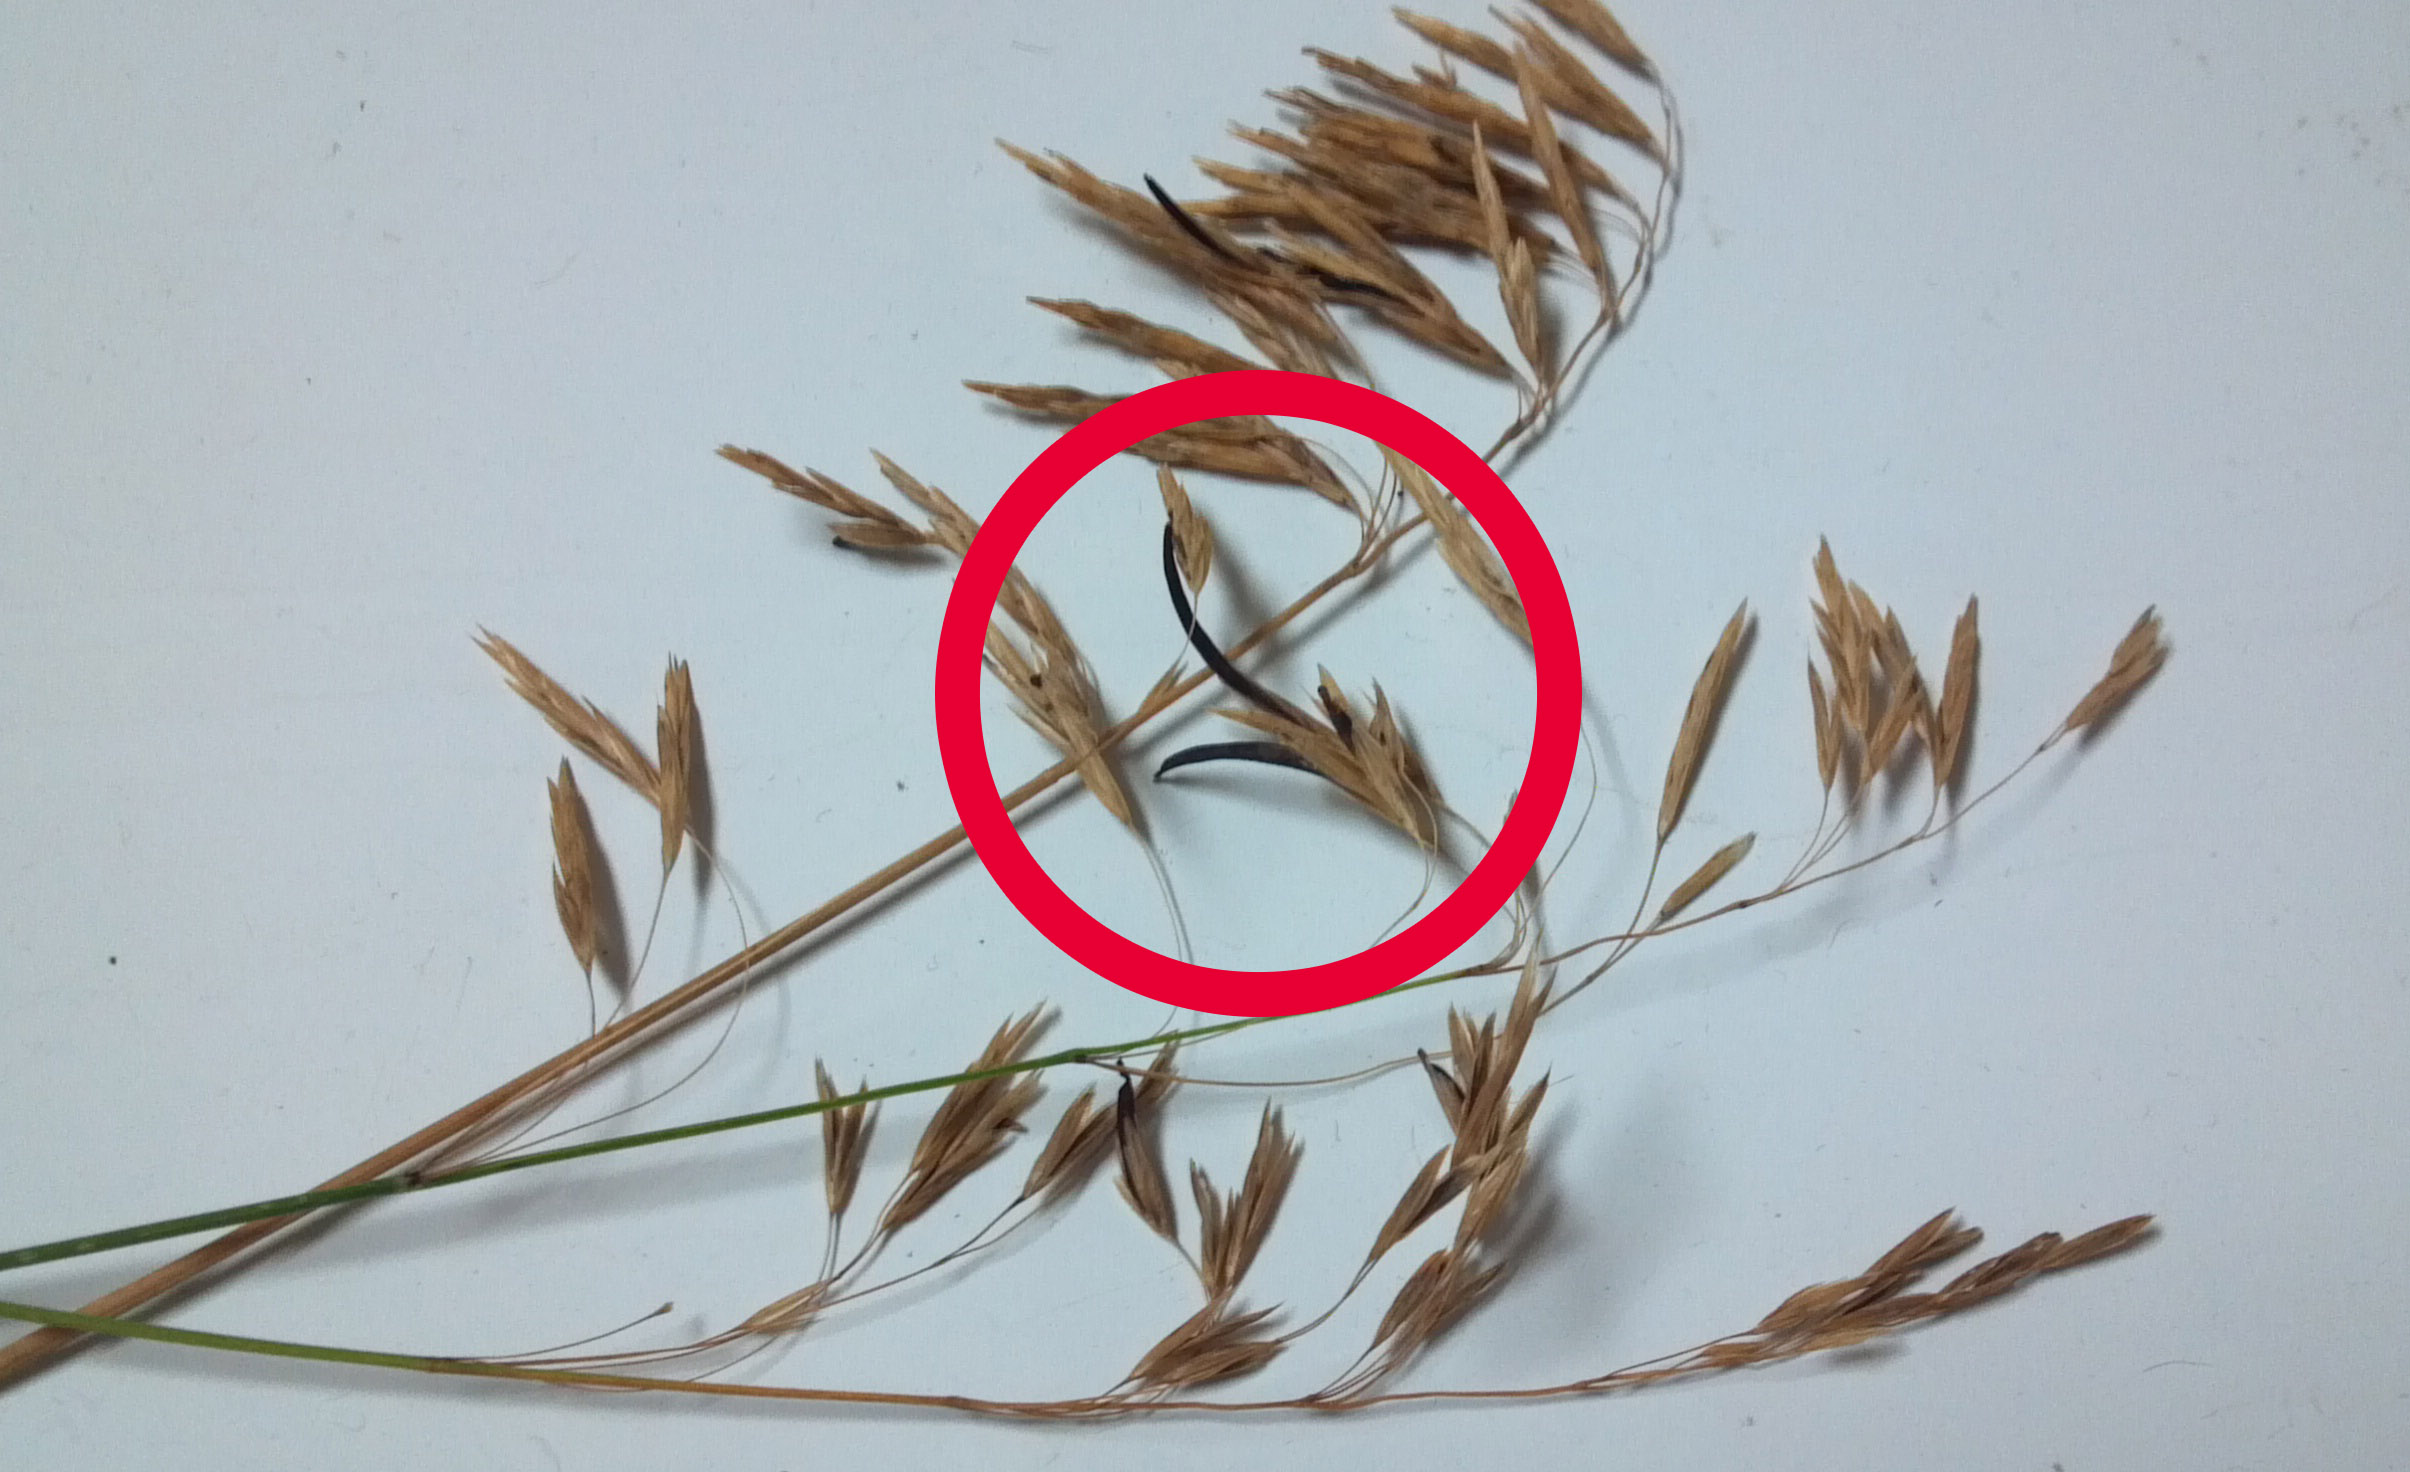 blades of brome grass. a red circle around a brown to black, thumbnail-shaped growth on one of the blades.